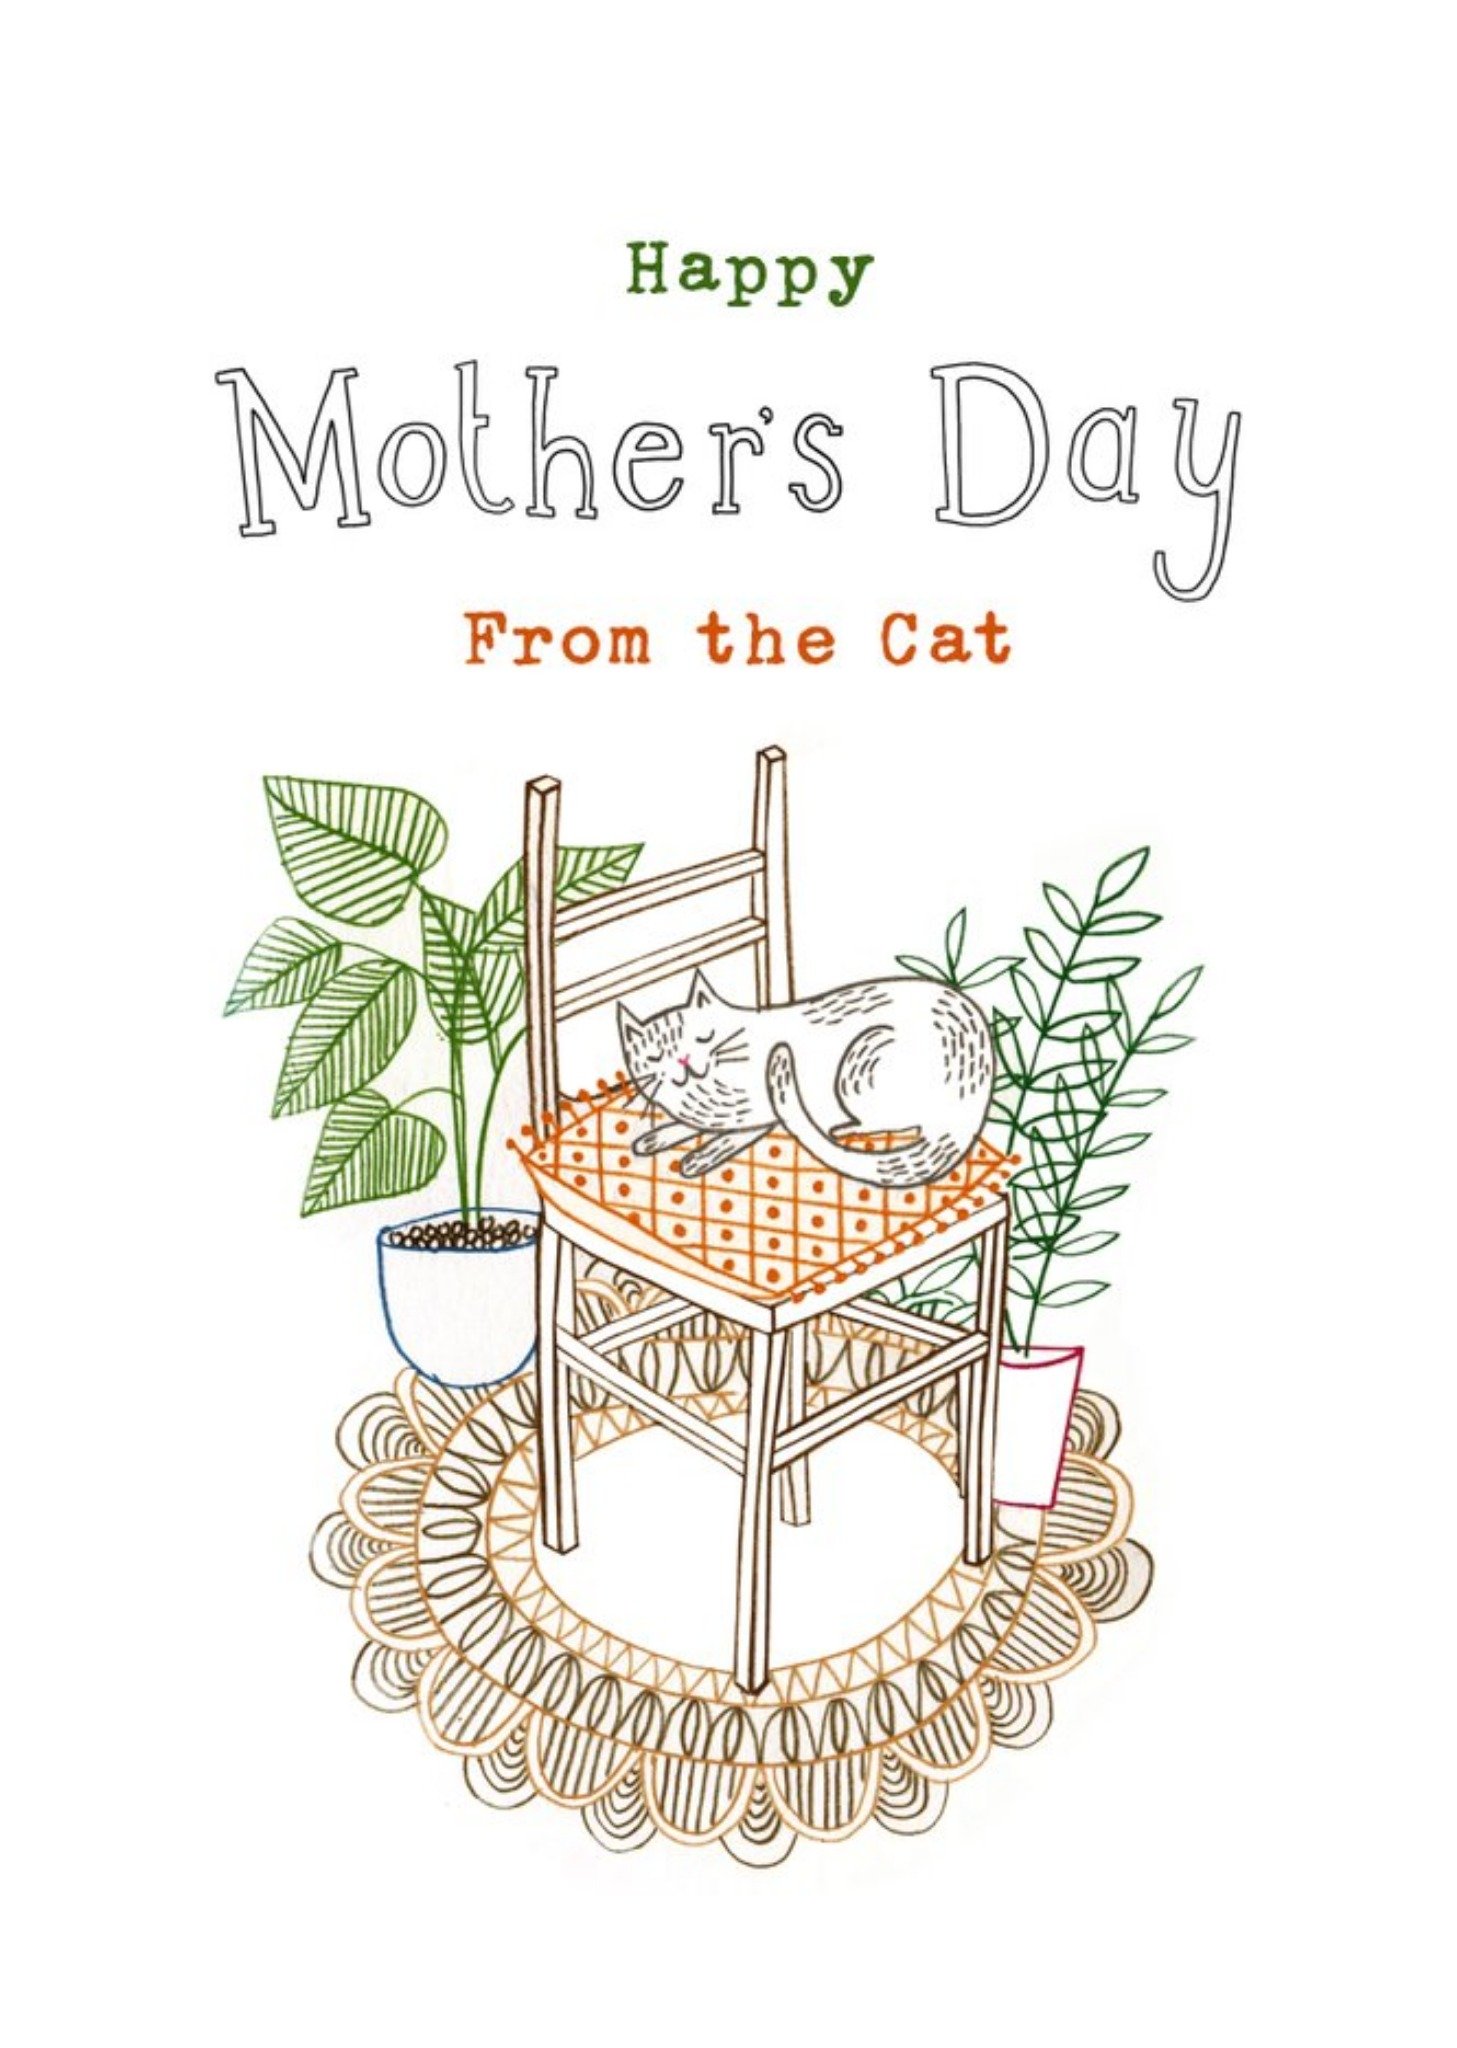 Moonpig Sleeping Kitty From The Cat Happy Mother's Day Card Ecard